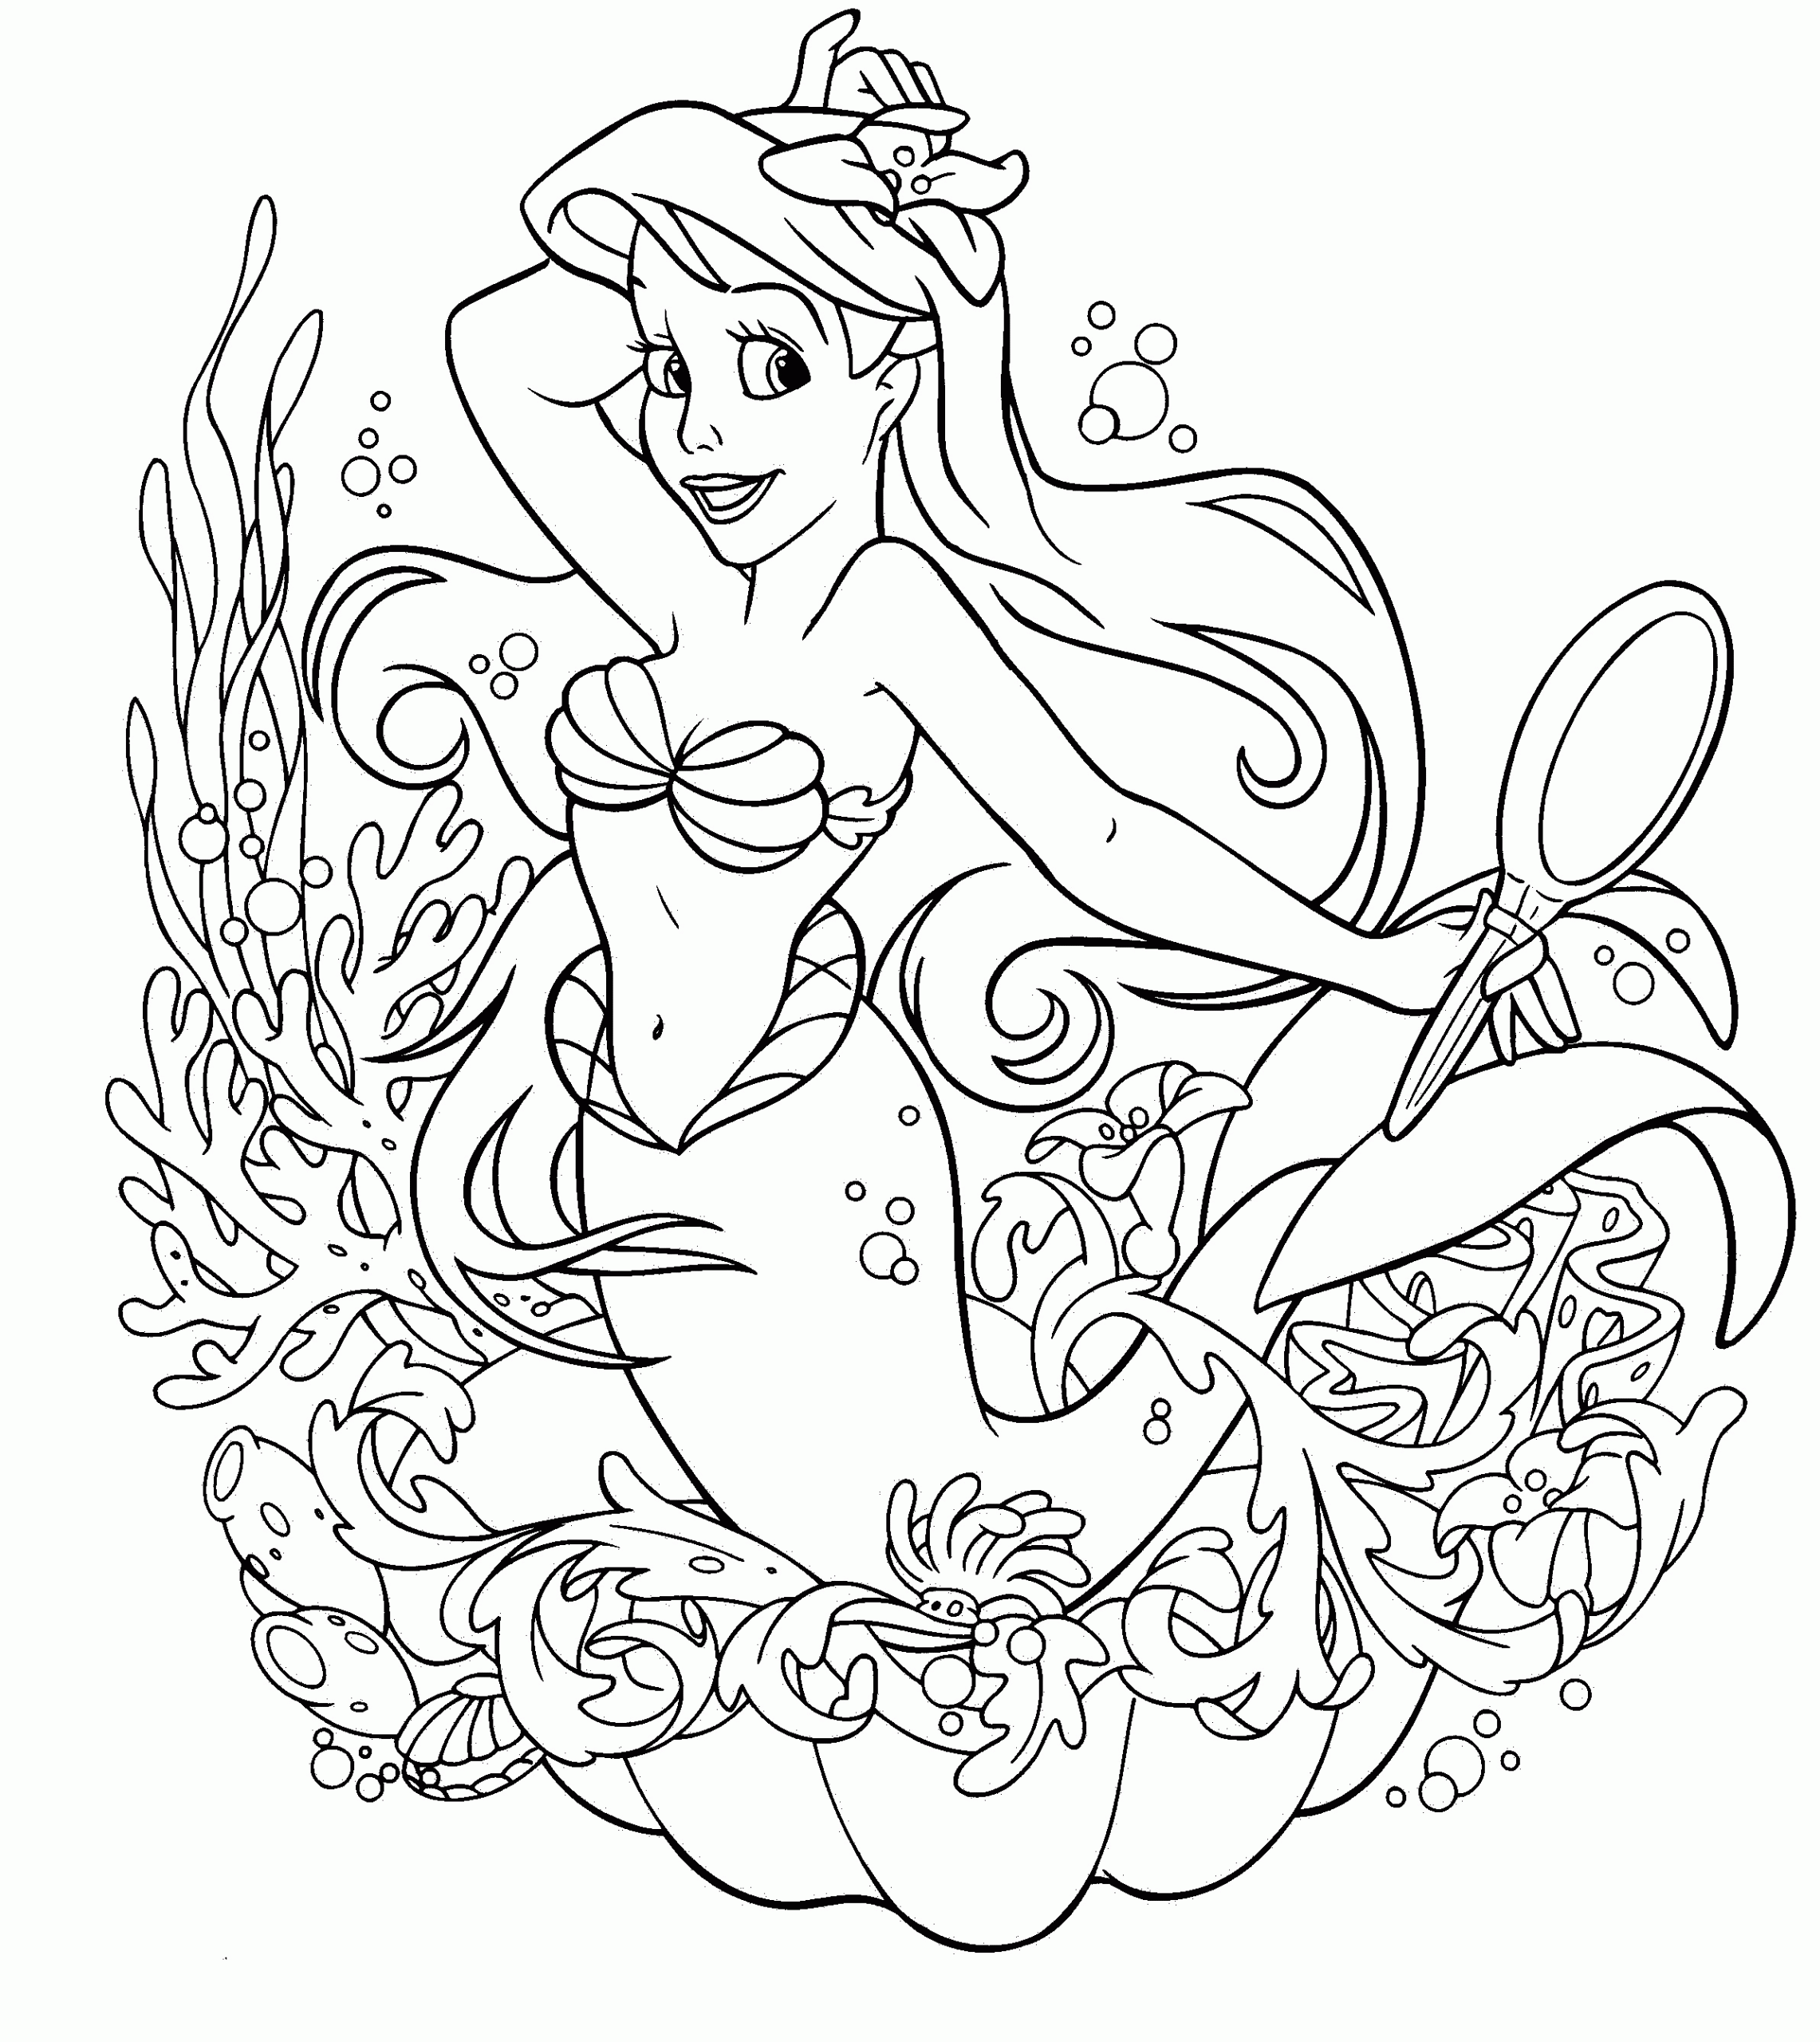 Coloring Sheet For Girls
 Coloring Pages for Girls Dr Odd